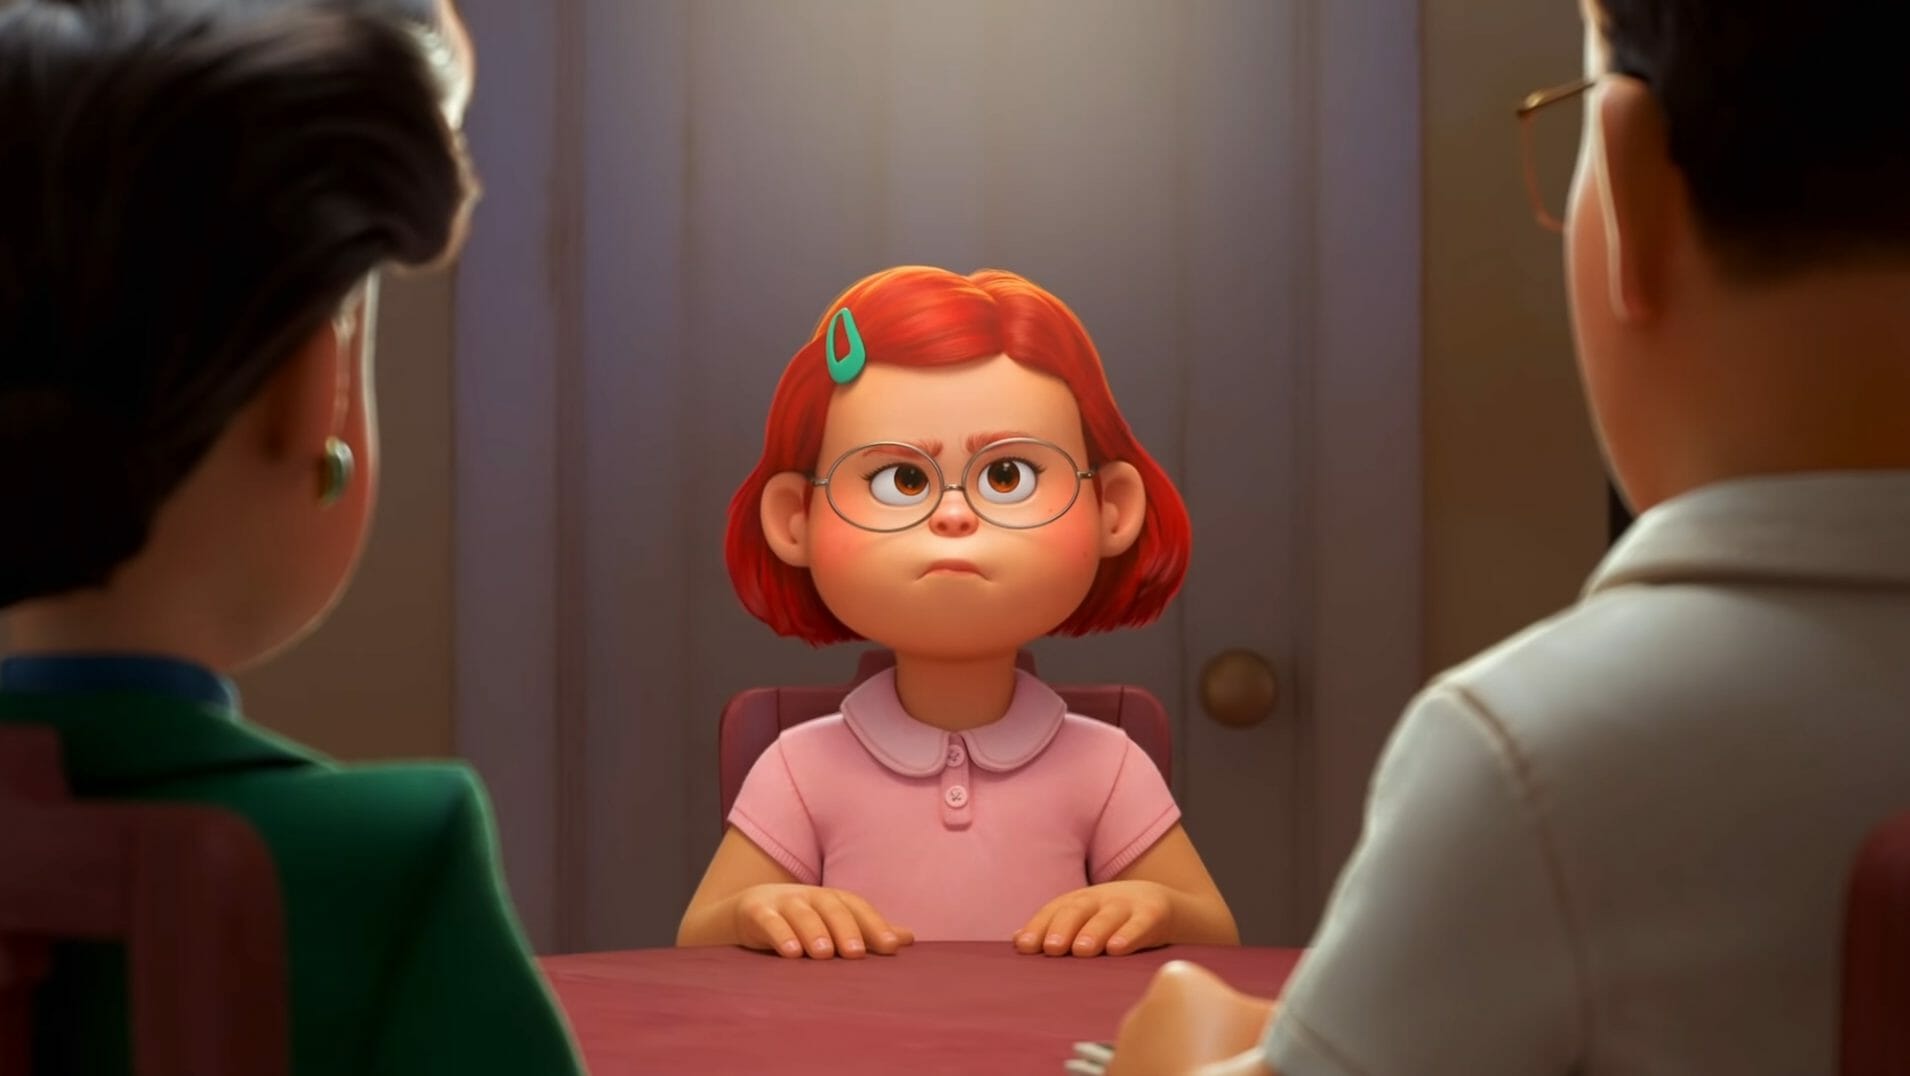 Mei with her new red hair sits between her mom and dad during a serious talk in the new Pixar film streaming on Disney+, TURNING RED.  